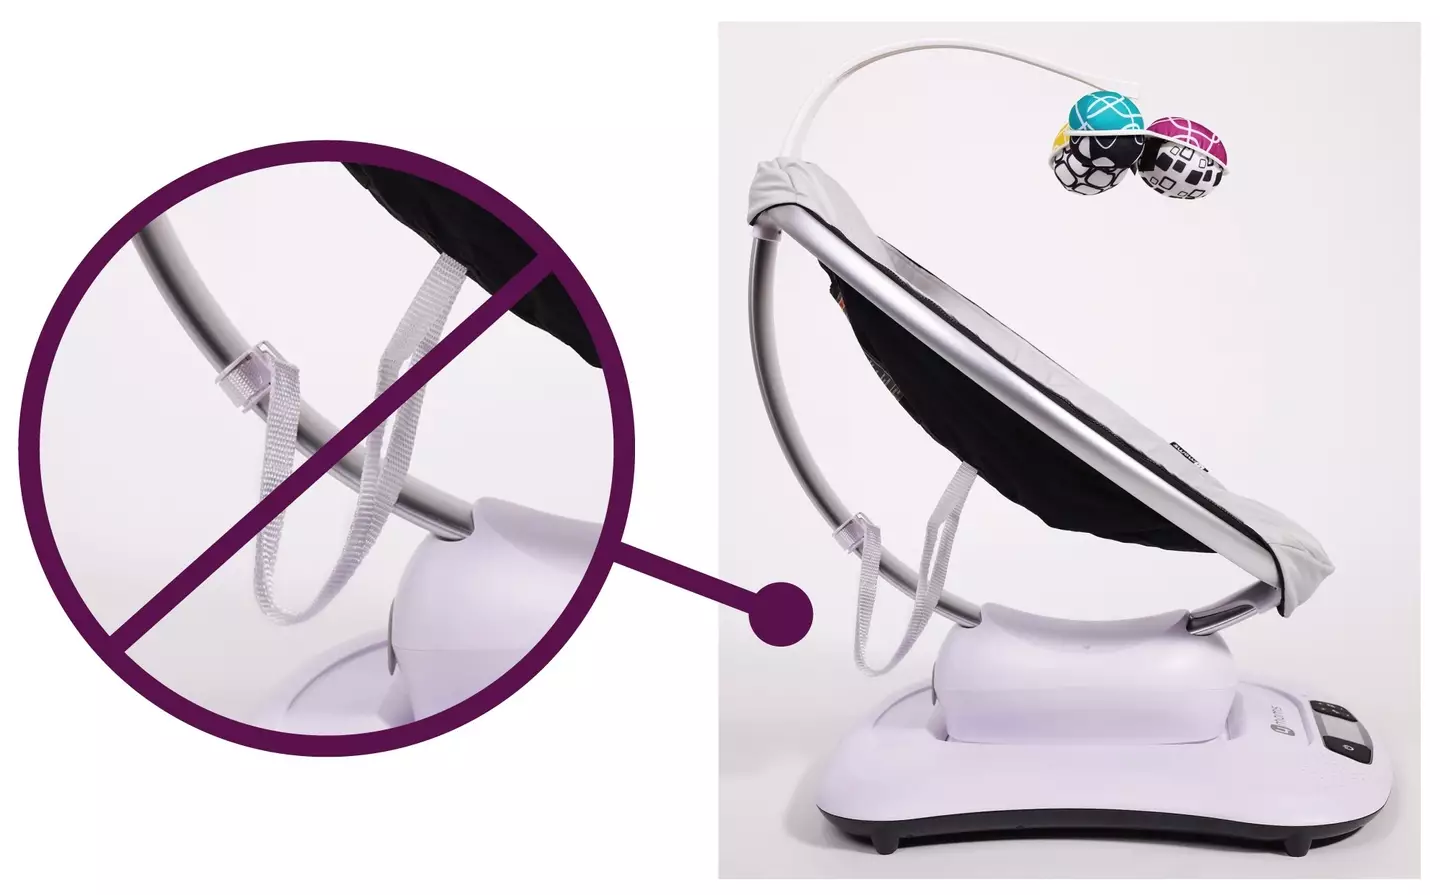 More than two million infant swings and rockers have been recalled for safety reasons.